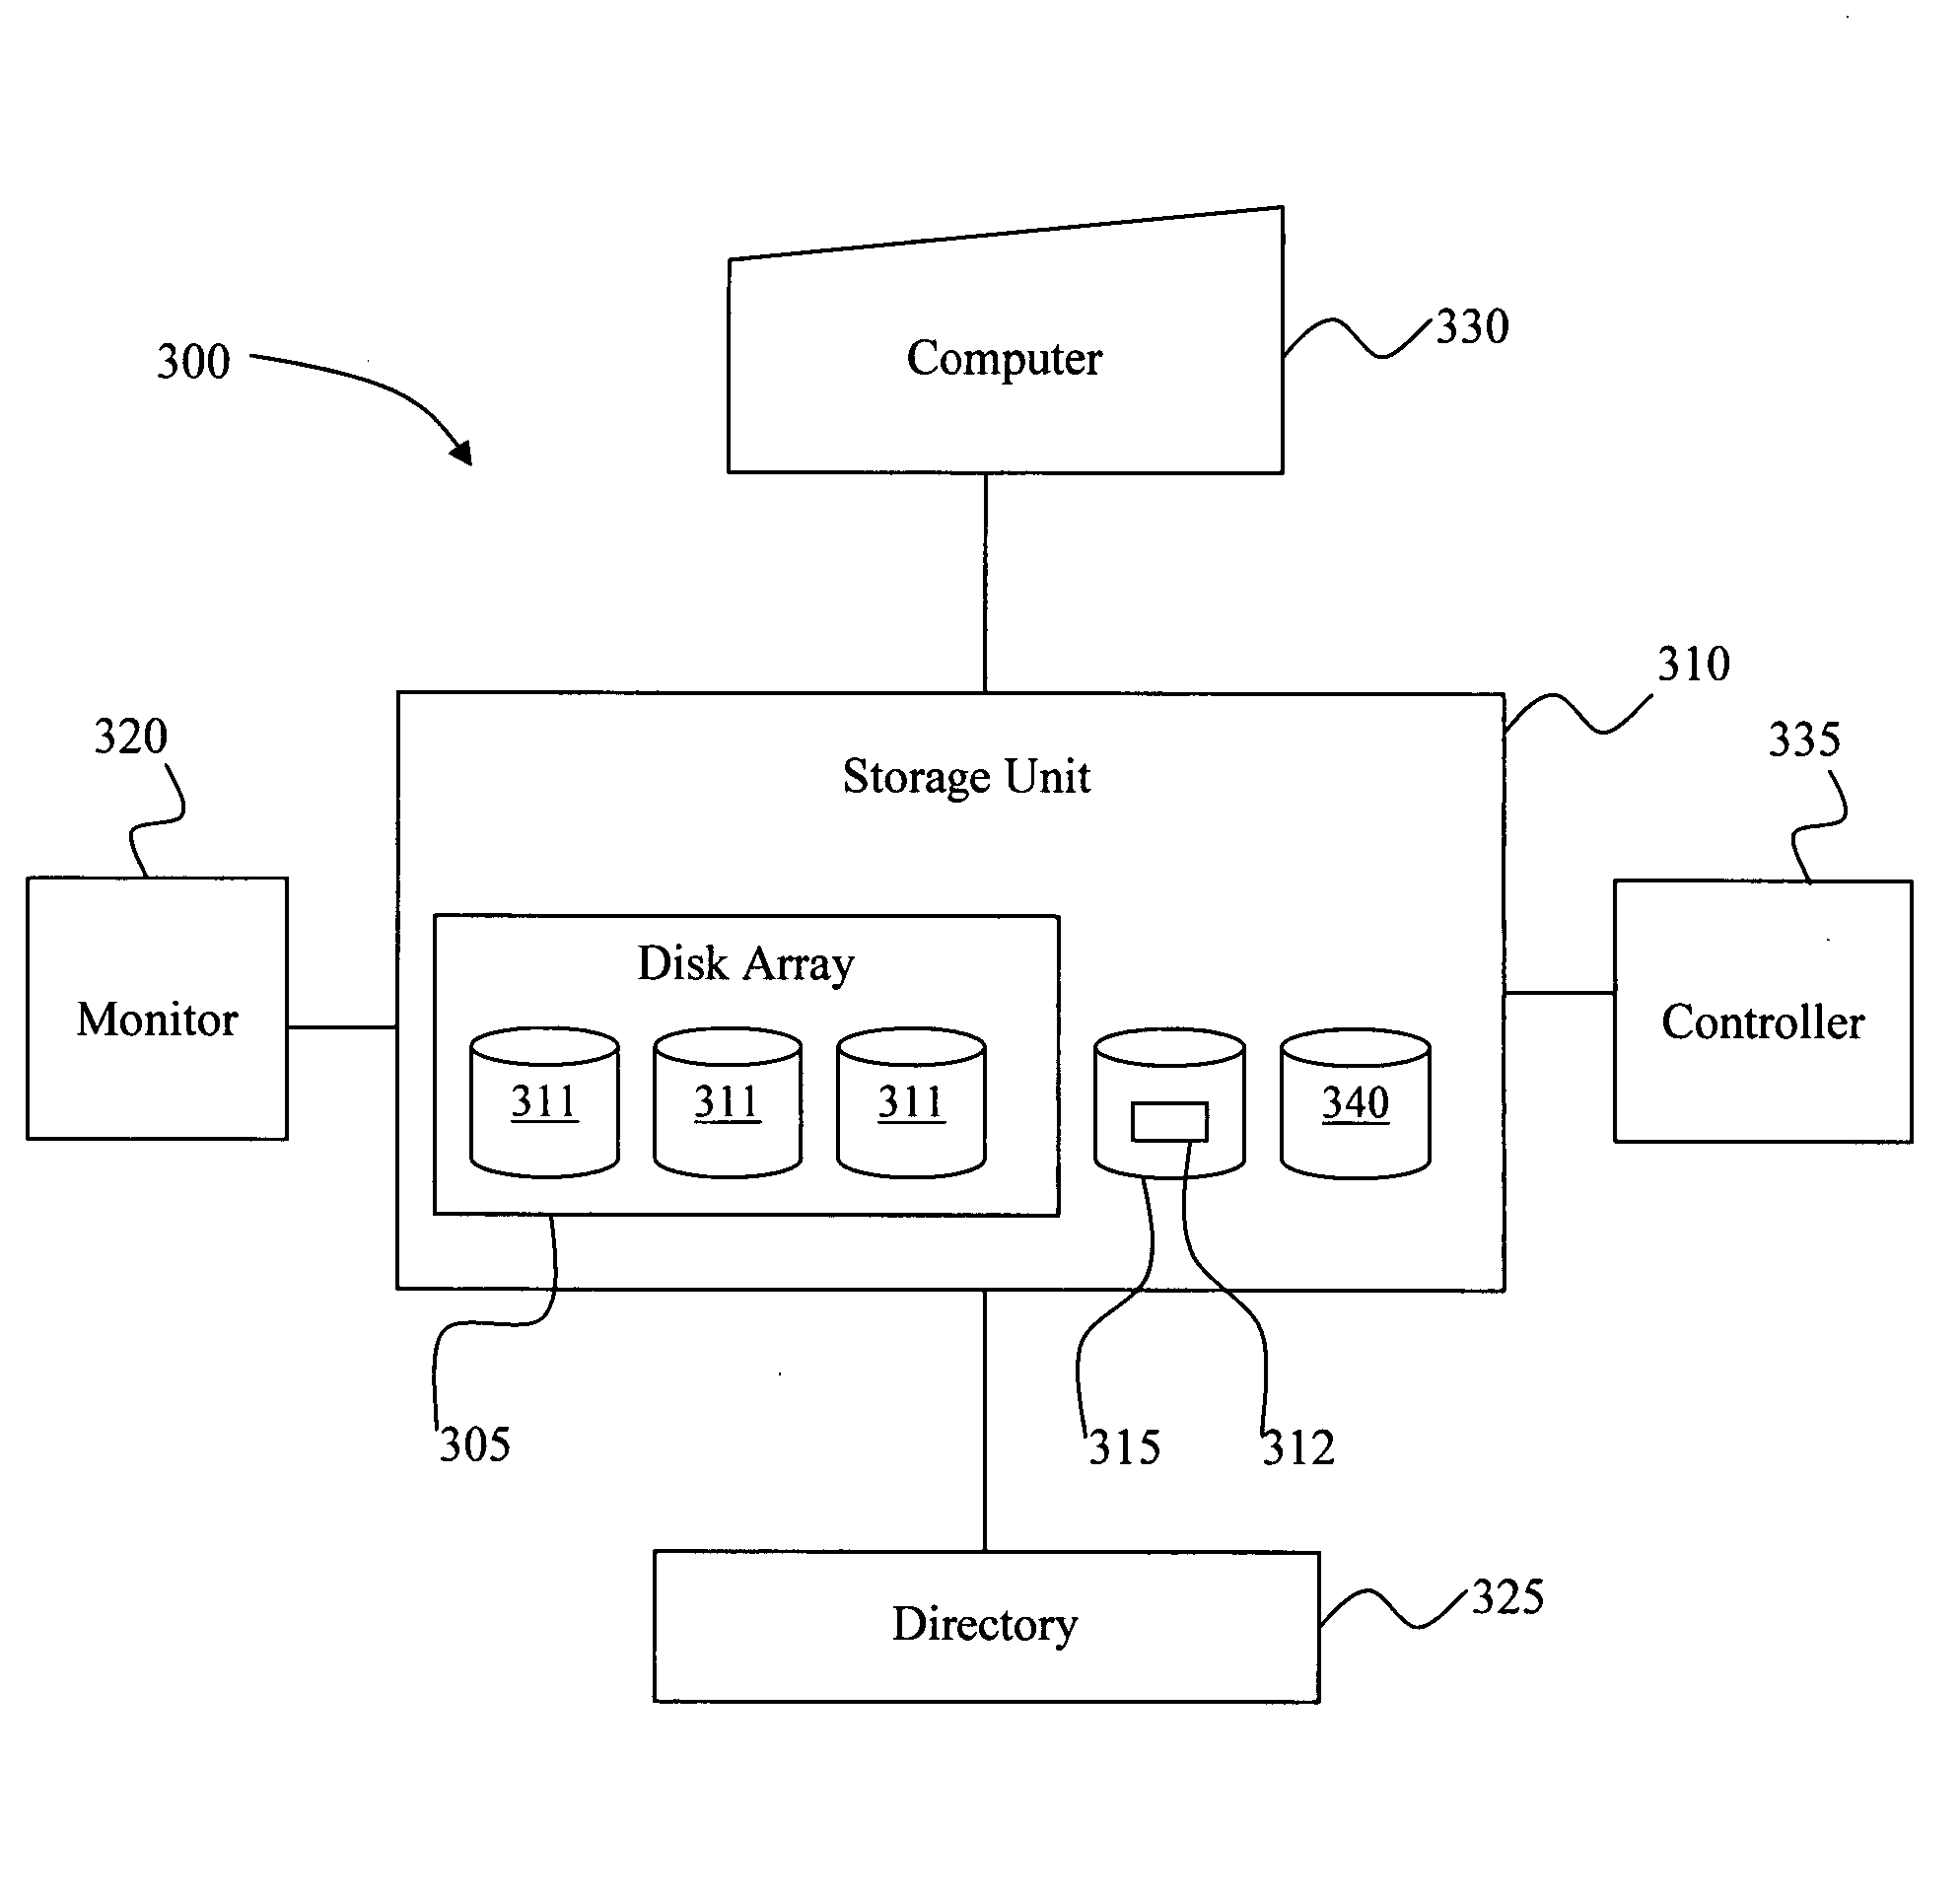 System and method for reducing data loss in disk arrays by establishing data redundancy on demand